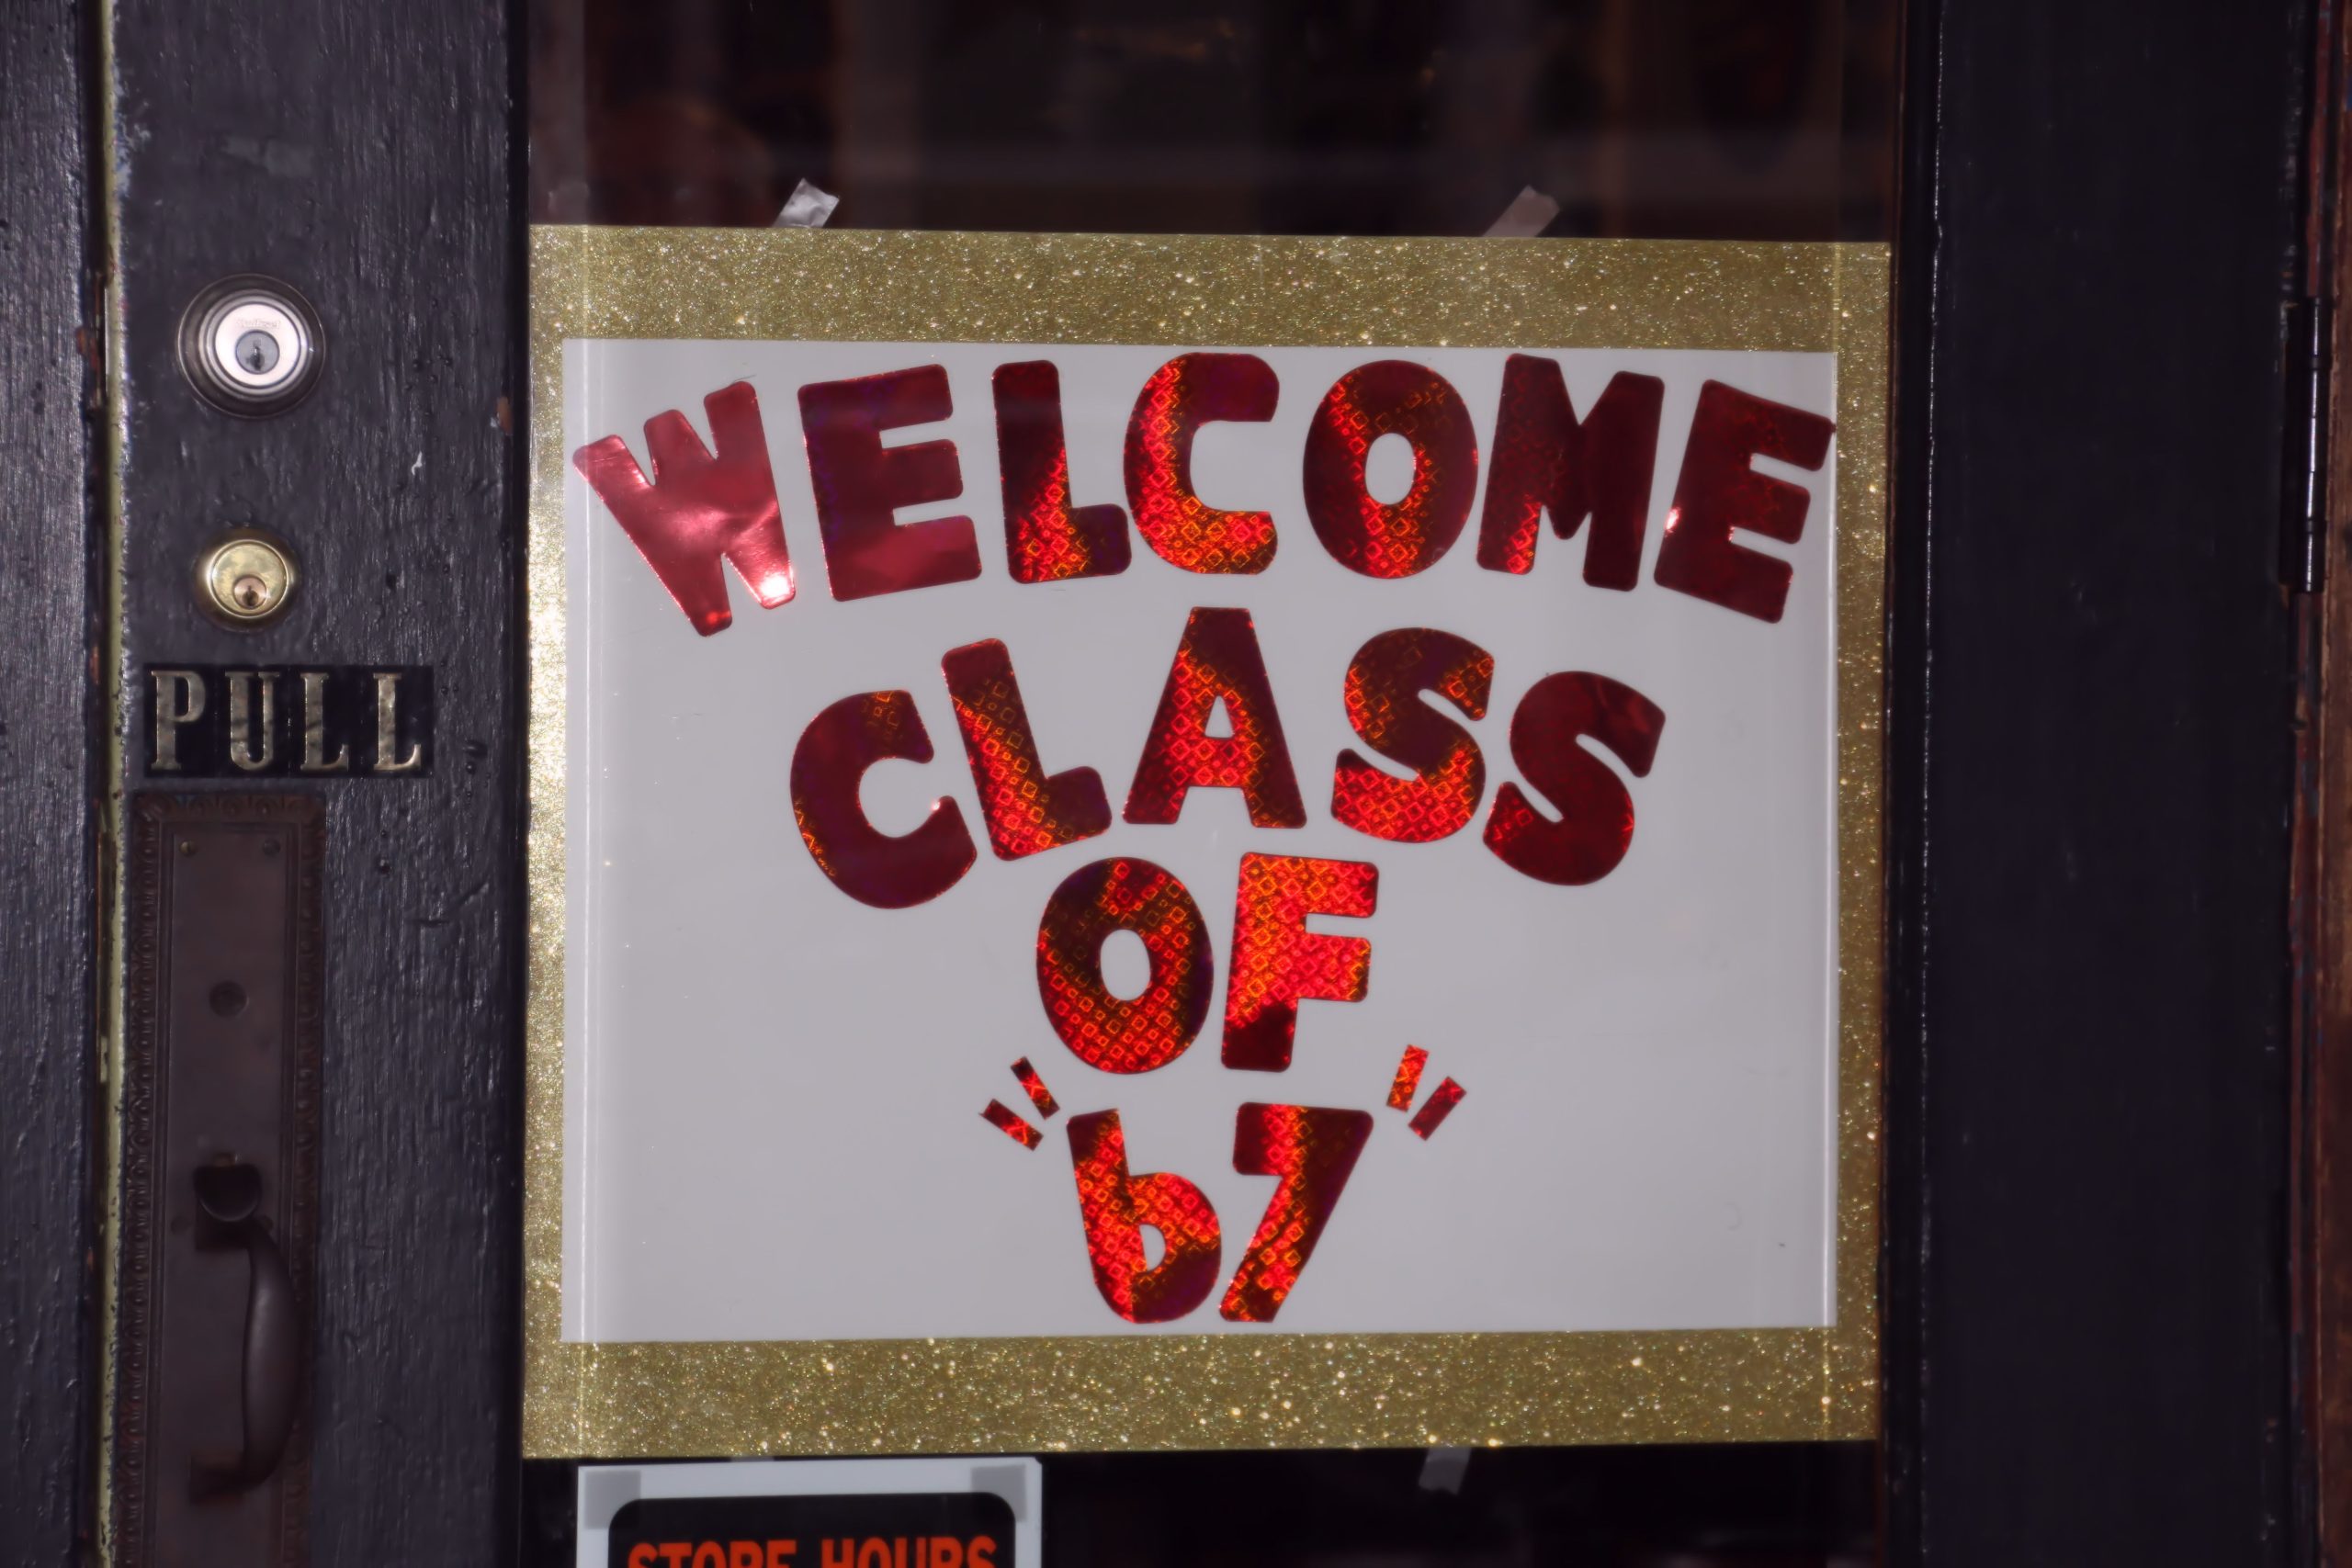 Welcome Class of 67 sign